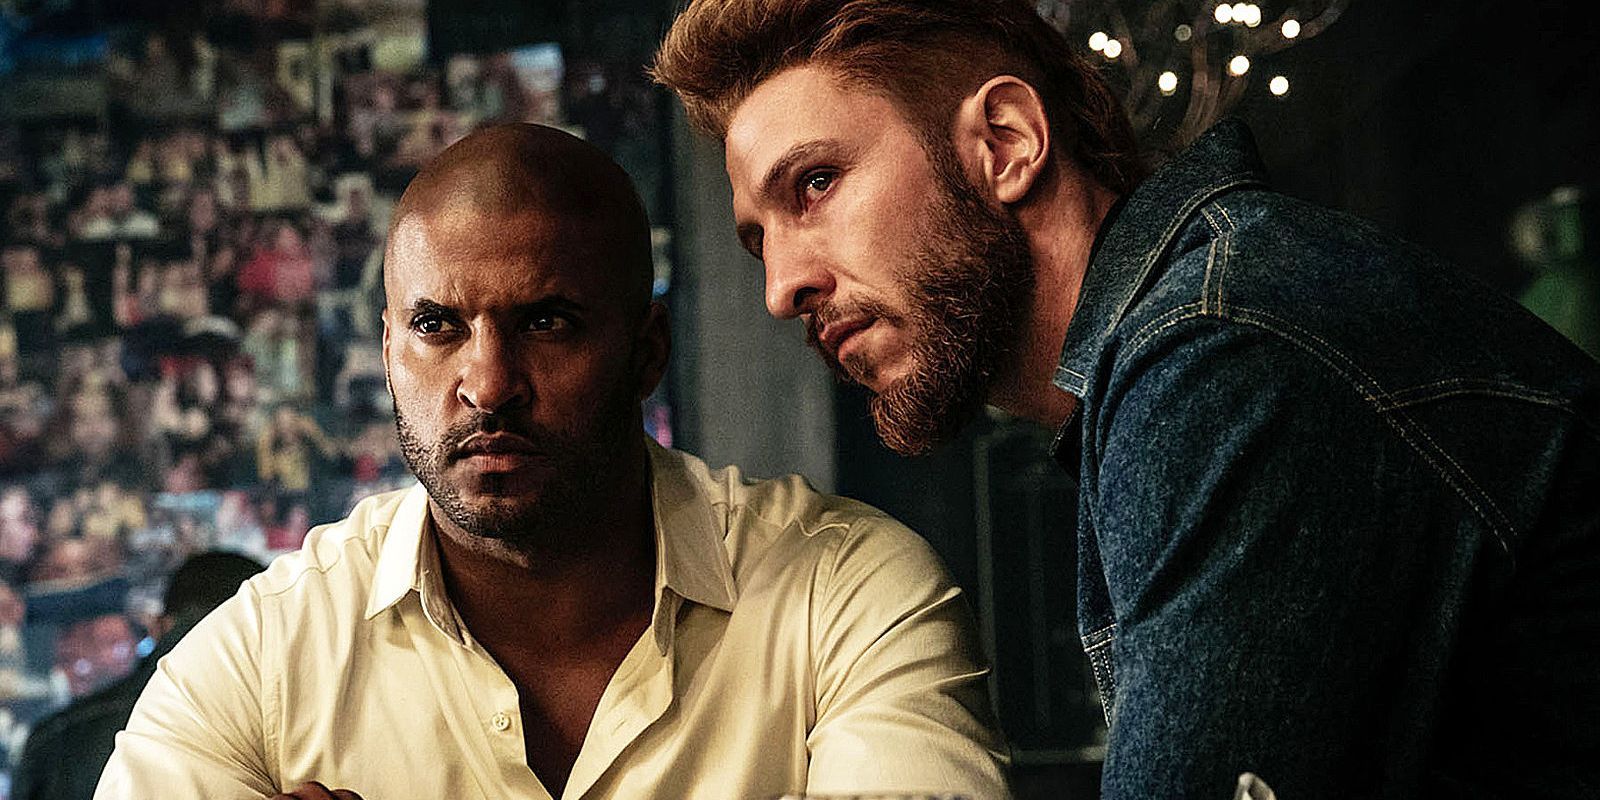 Mad Sweeney tells Shadow Moon about Wednesday's true identity and character in American Gods season 1